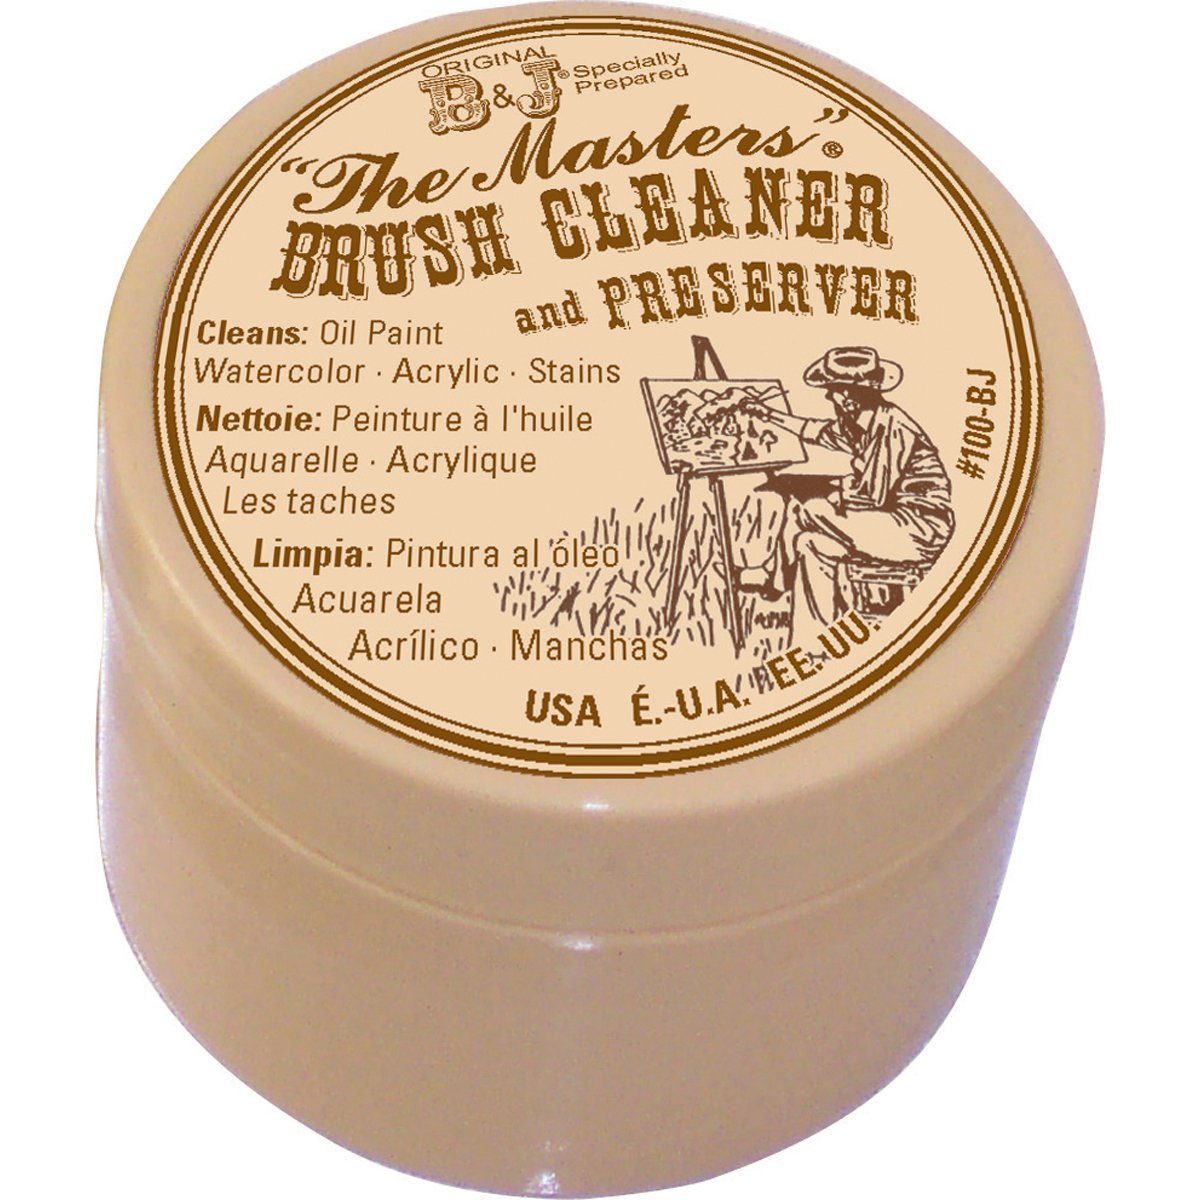 The Masters Brush Cleaner and Preserver